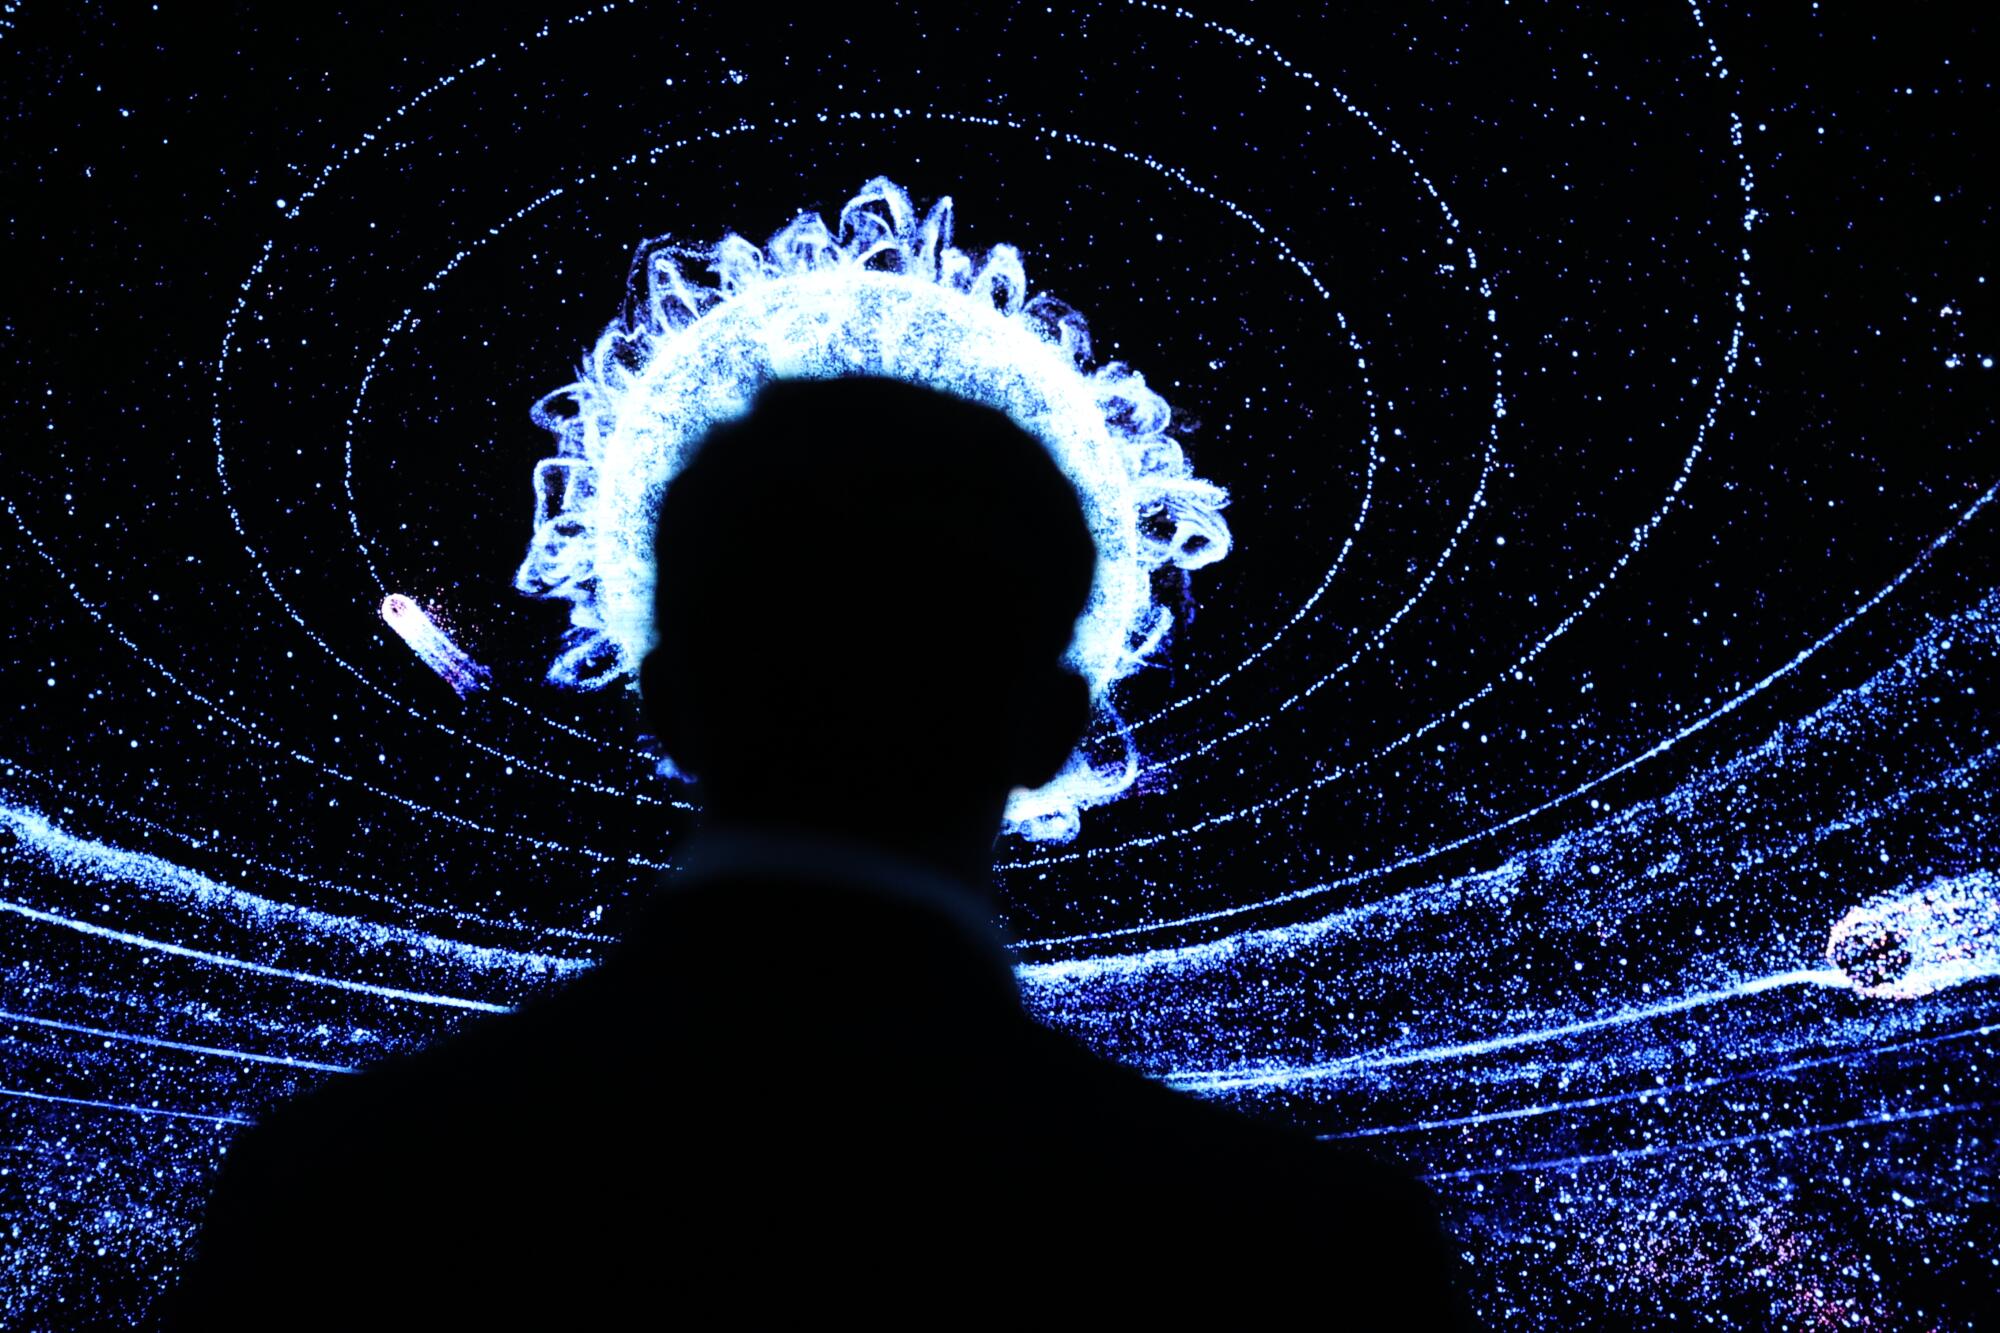 A audience member watches the "Seek" immersive show experience at Cosm.